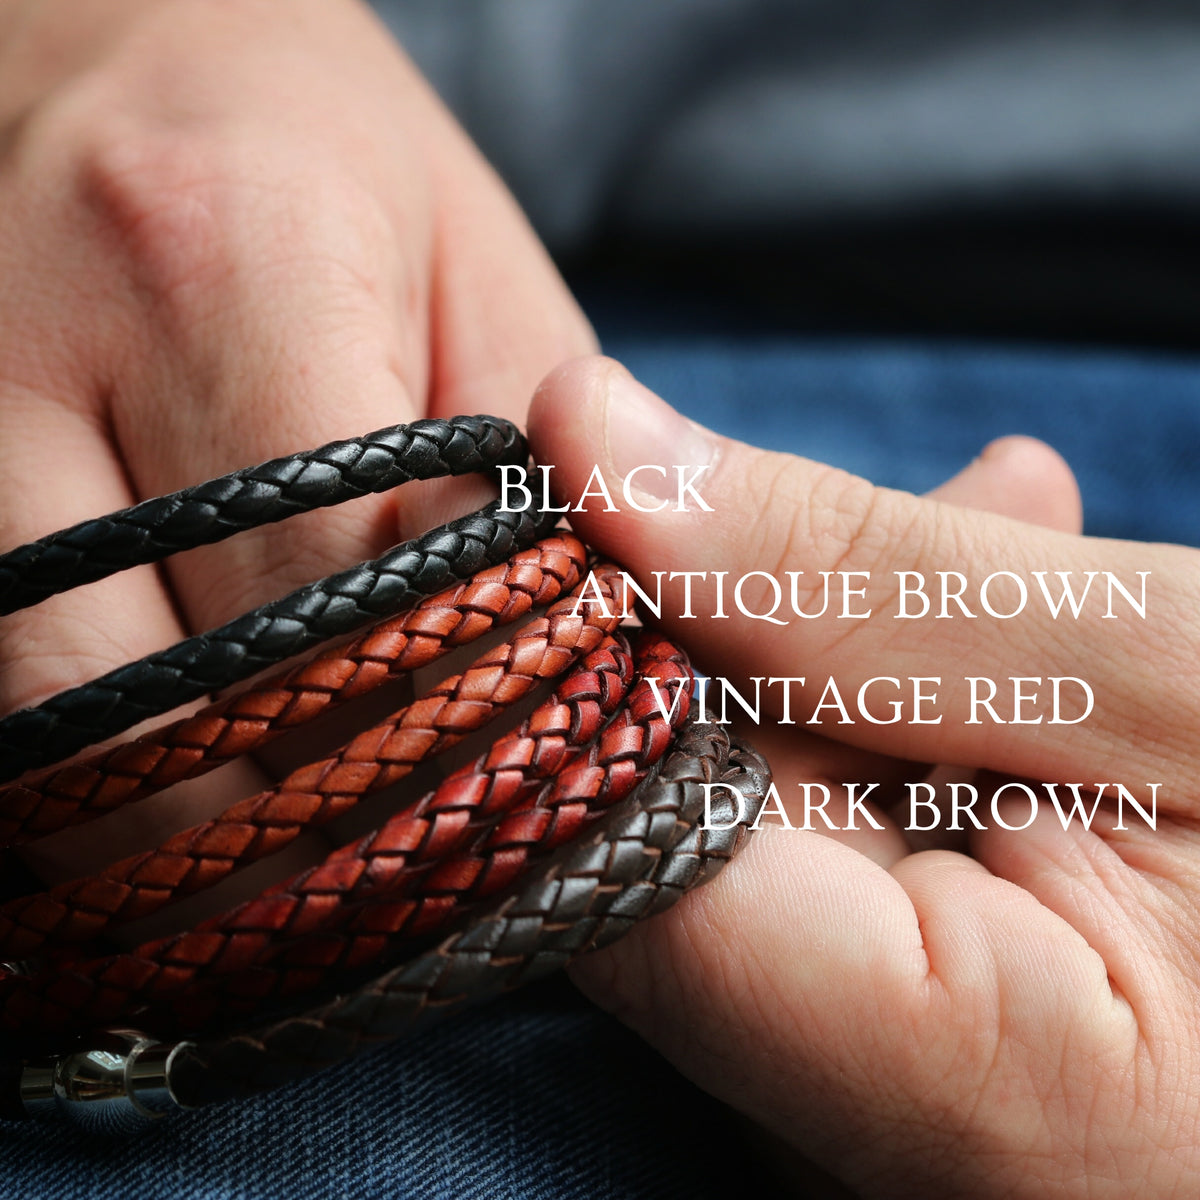 Leather Bracelets in Soft Nappa or Braided